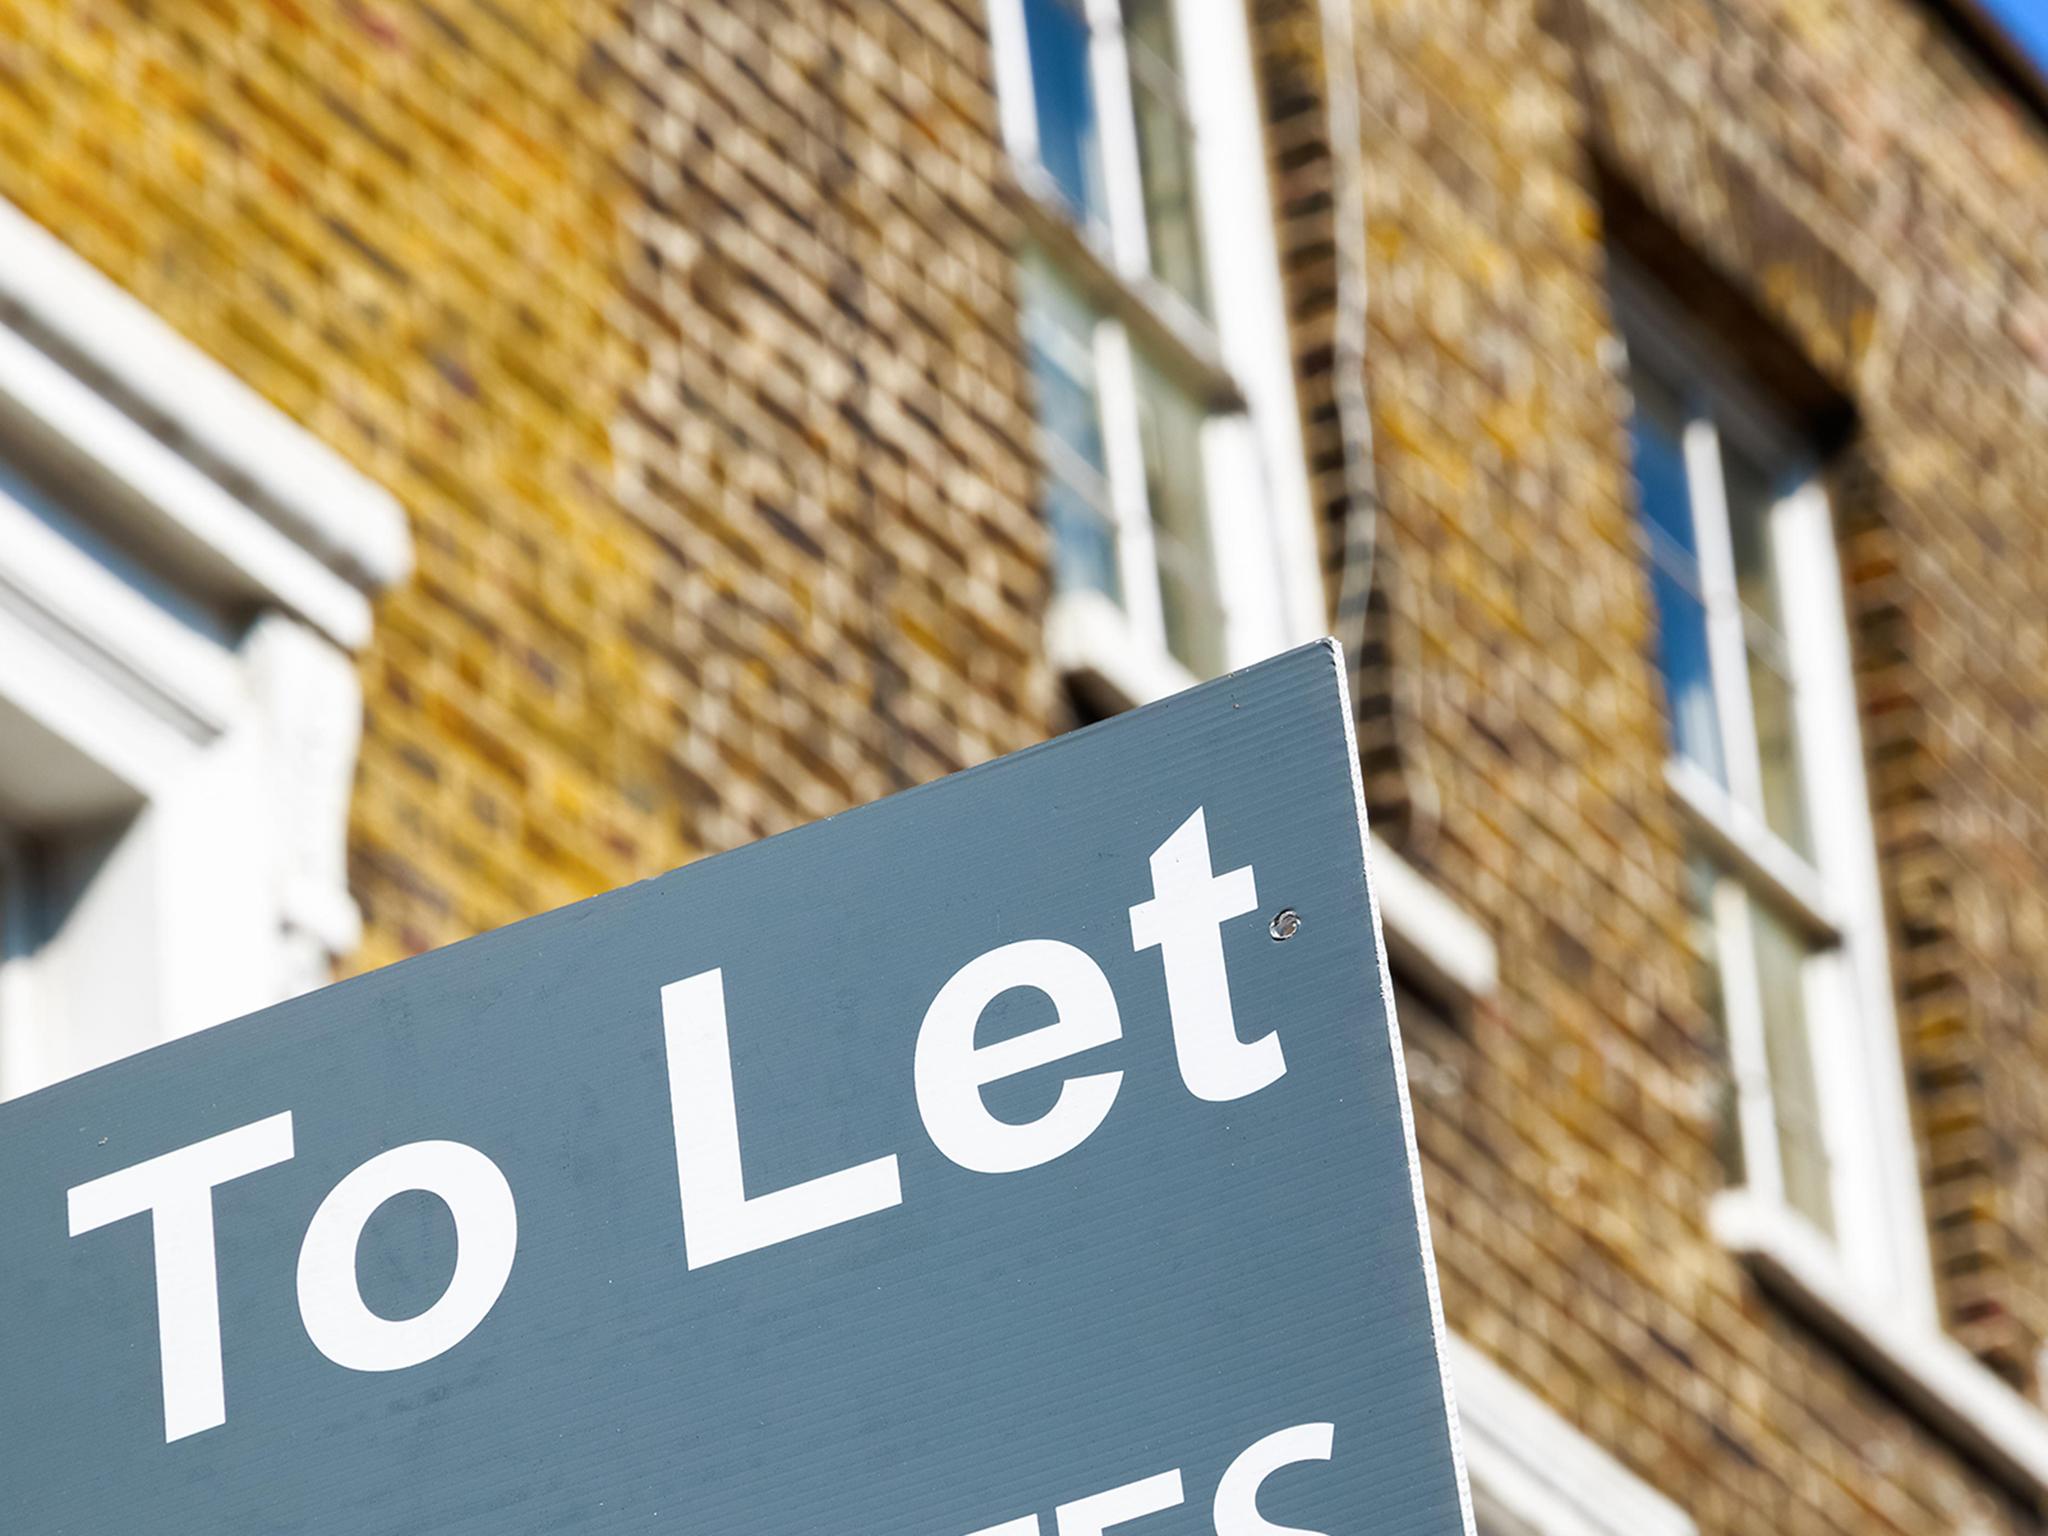 ‘Landlords’ confidence in their own lettings portfolios has been on the decline for some time’